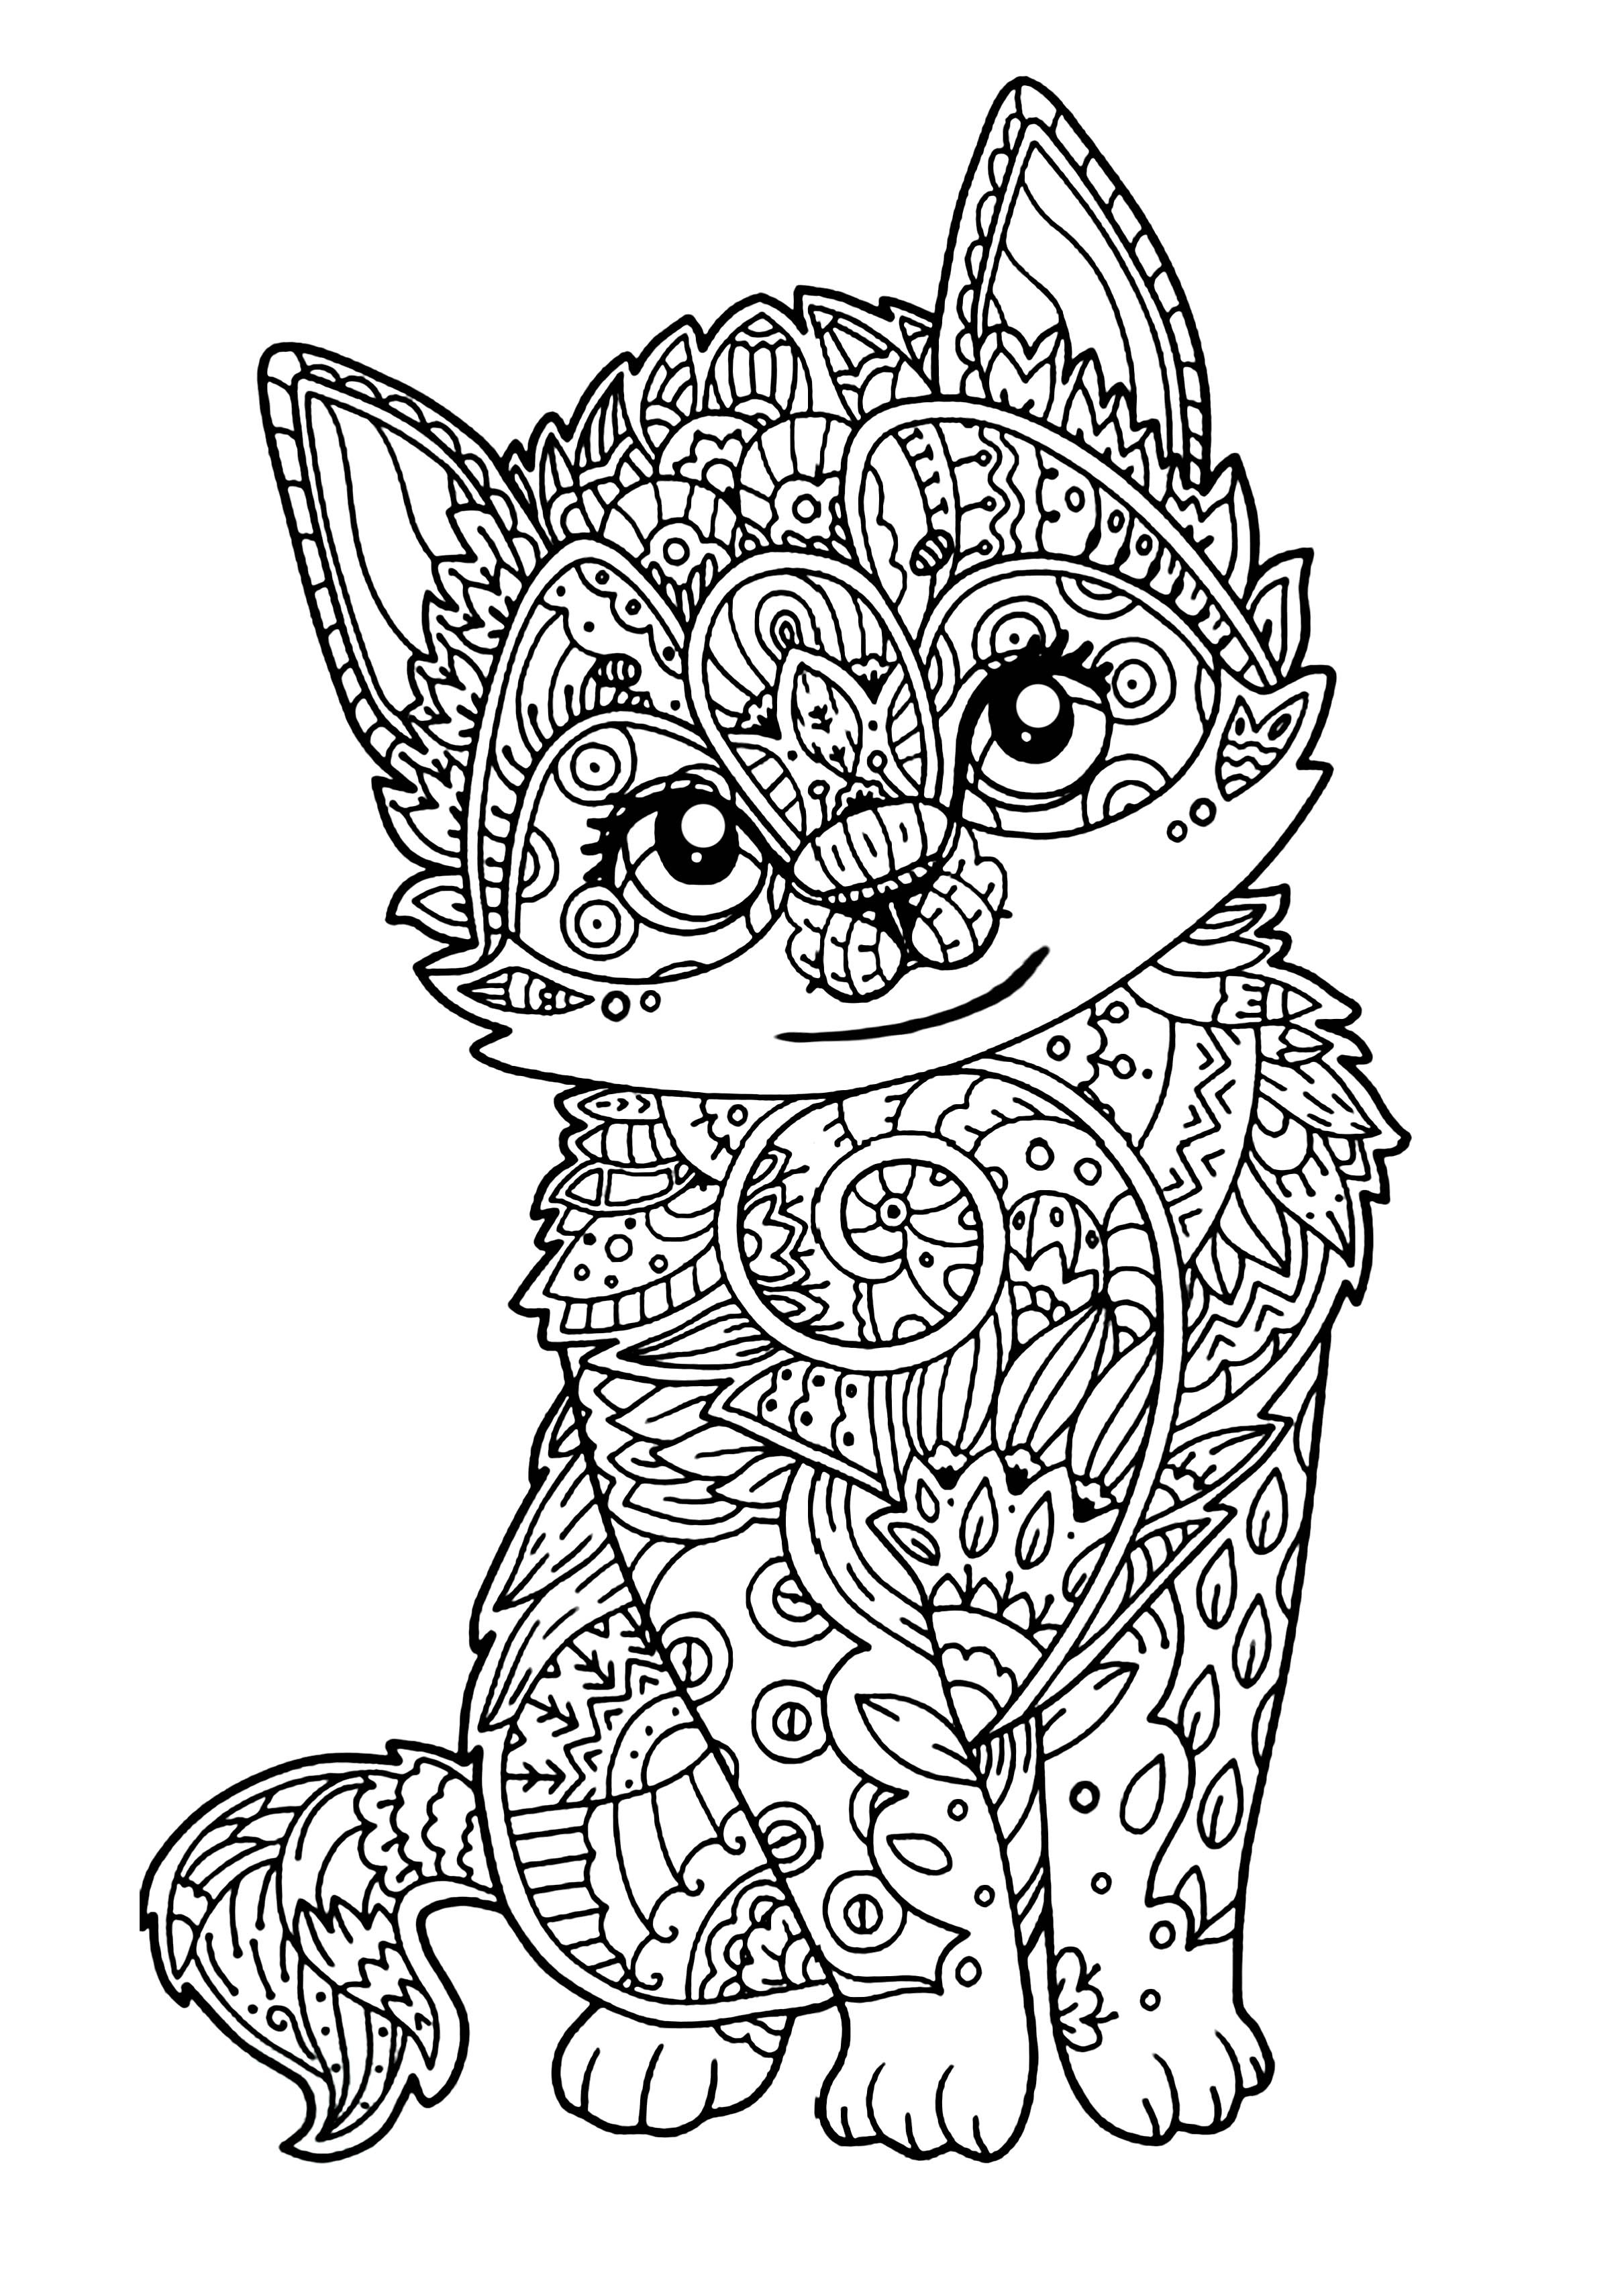 Coloring Pages Of Animals Hard Coloring Ideas Hard Animal Coloringes For Adults Getitright Mee